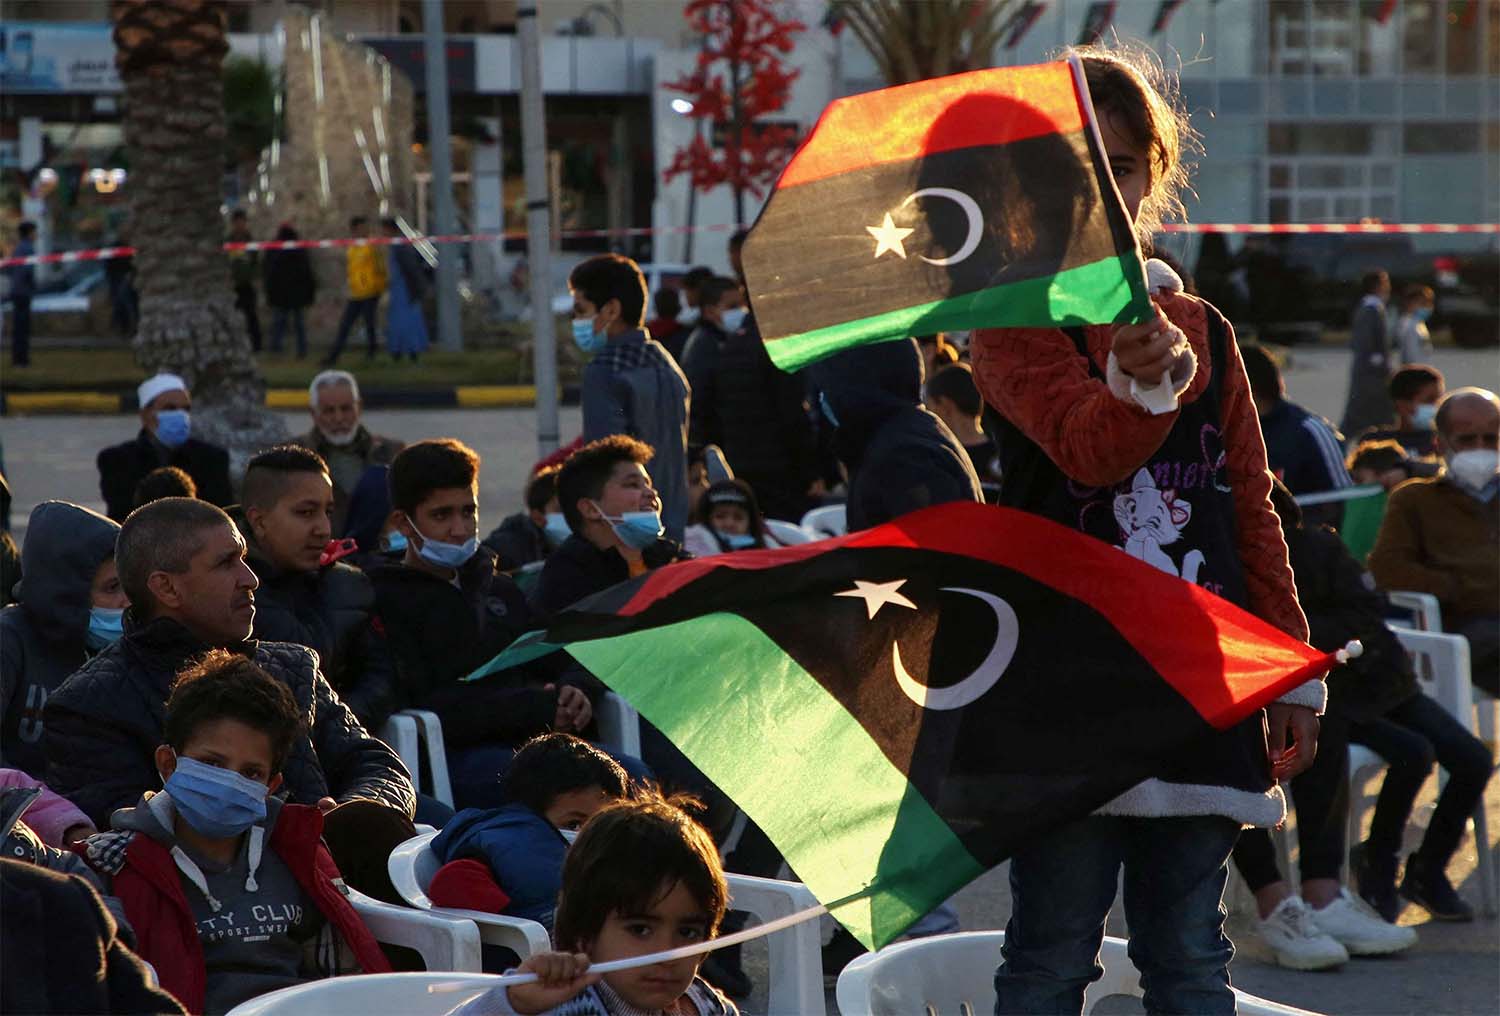 Libya has become one of the most intractable conflicts leftover from the “Arab spring” a decade ago